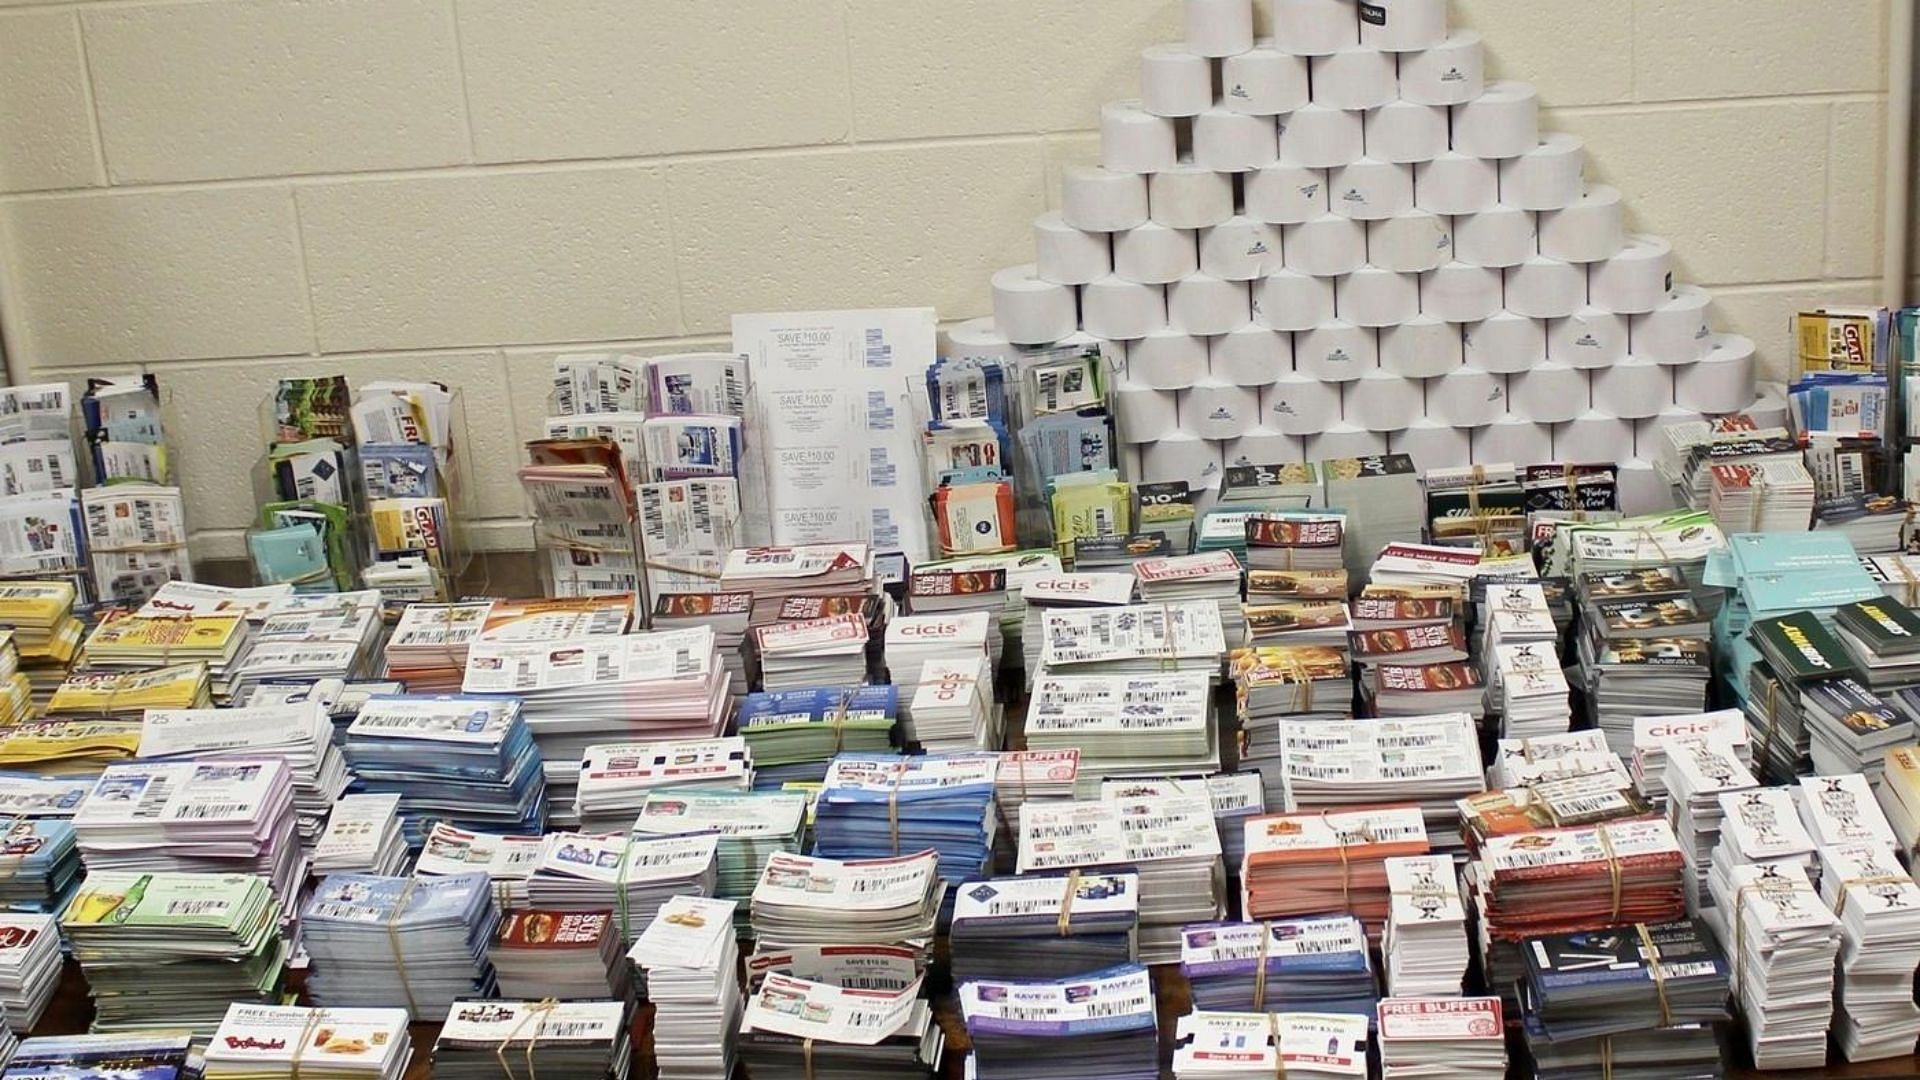 During investigation, authorities seized almost $1 million worth of counterfeit coupons from Talens&#039; residence(Image Via WRIC/Google)